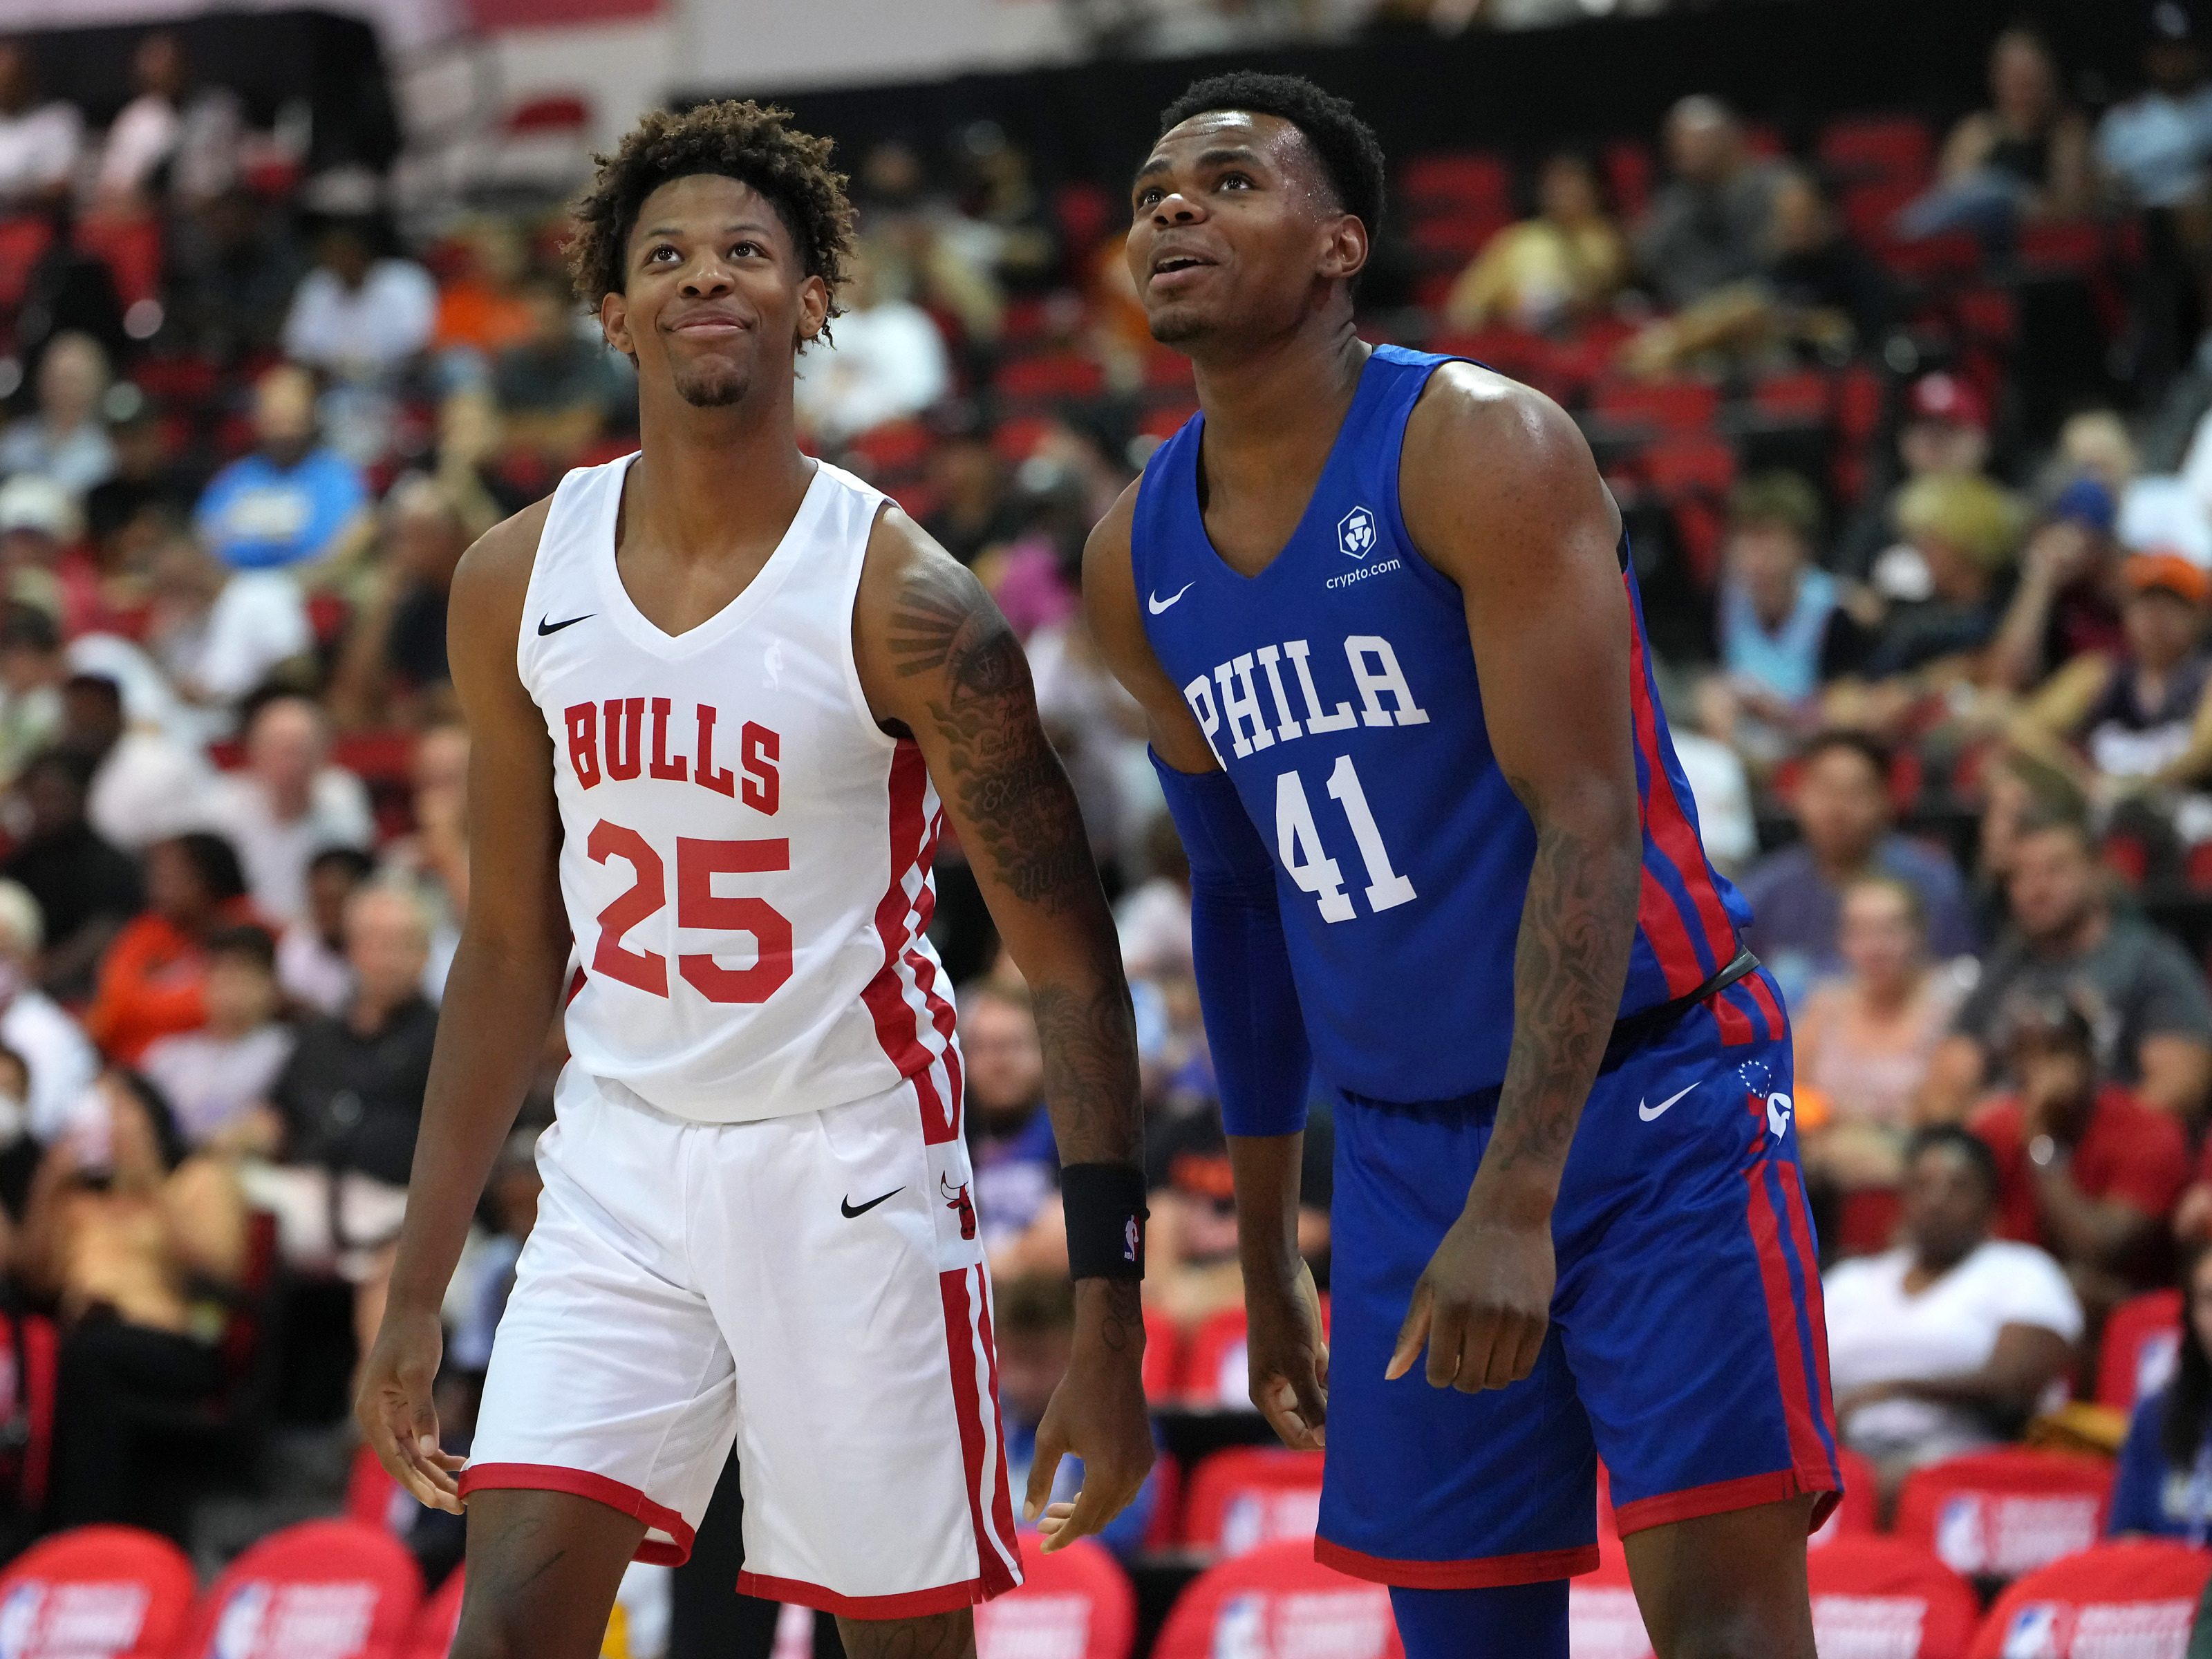 Philadelphia 76ers: A look at the 2019 NBA Summer League roster - Page 2